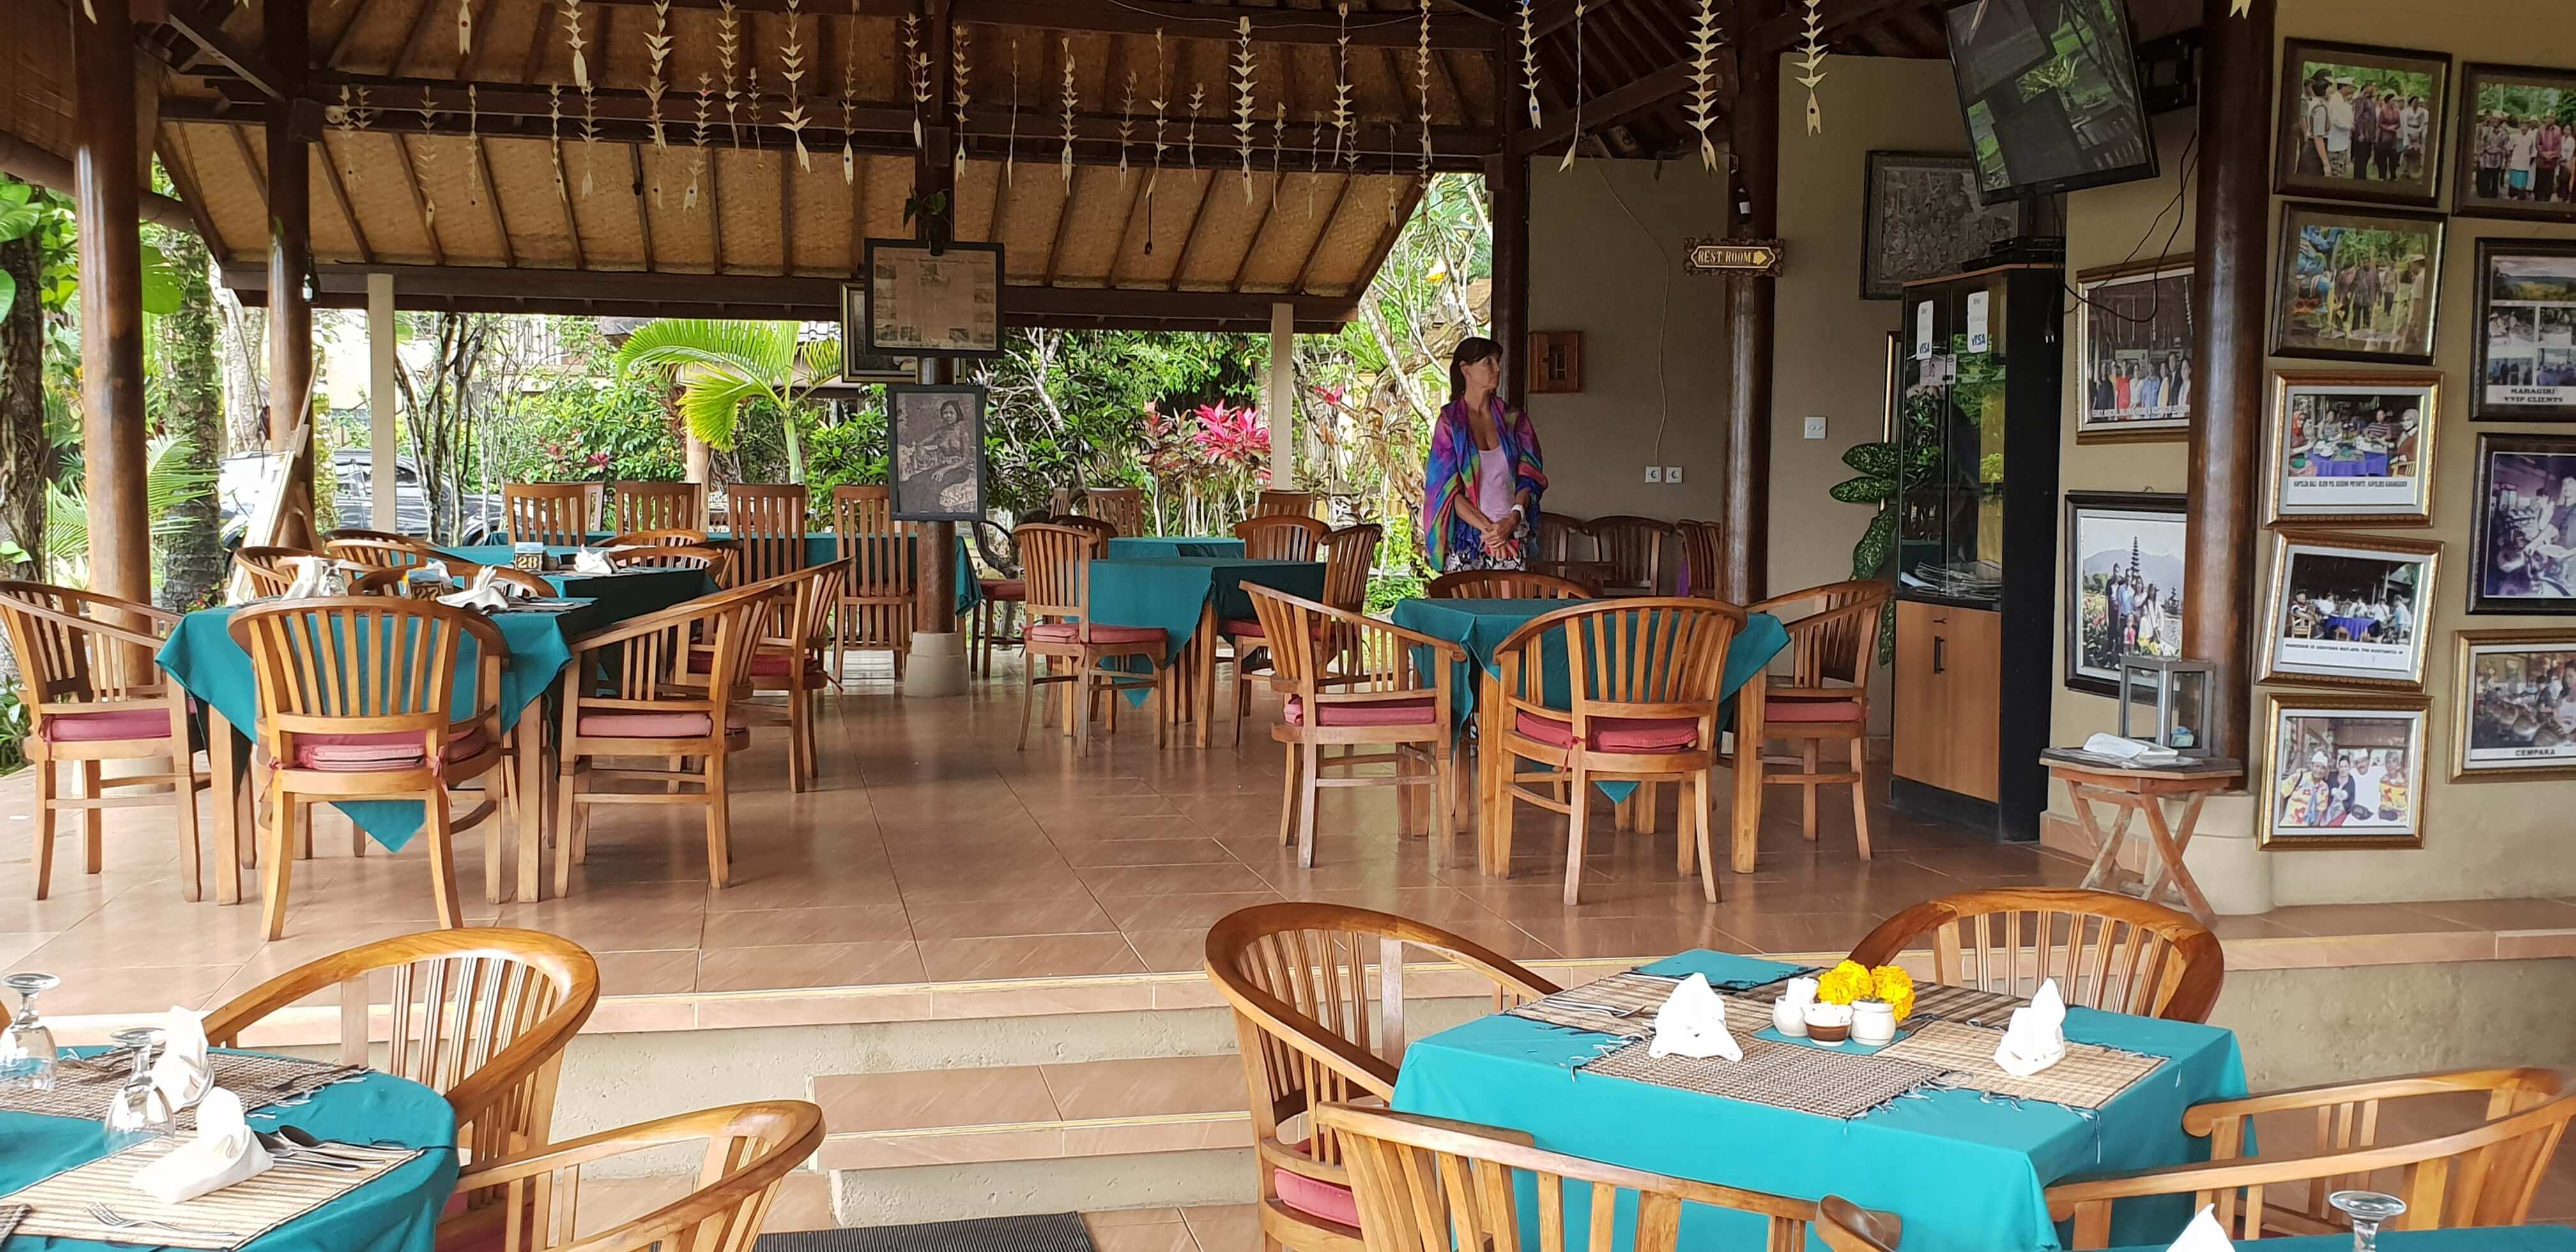 View of the indoor seating at the Mahagiri Resort and Restaurant